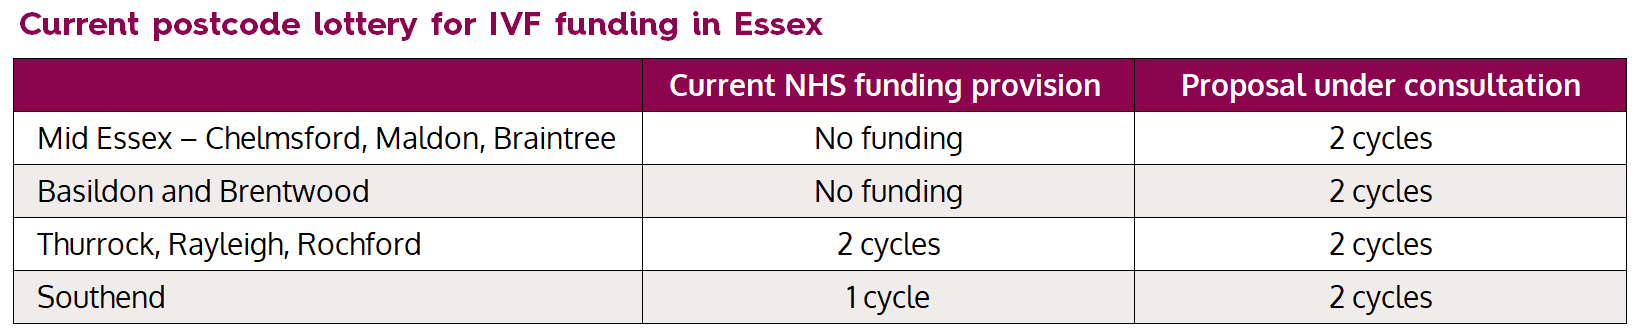 Current postcode lottery for NHS-funded IVF in Essex